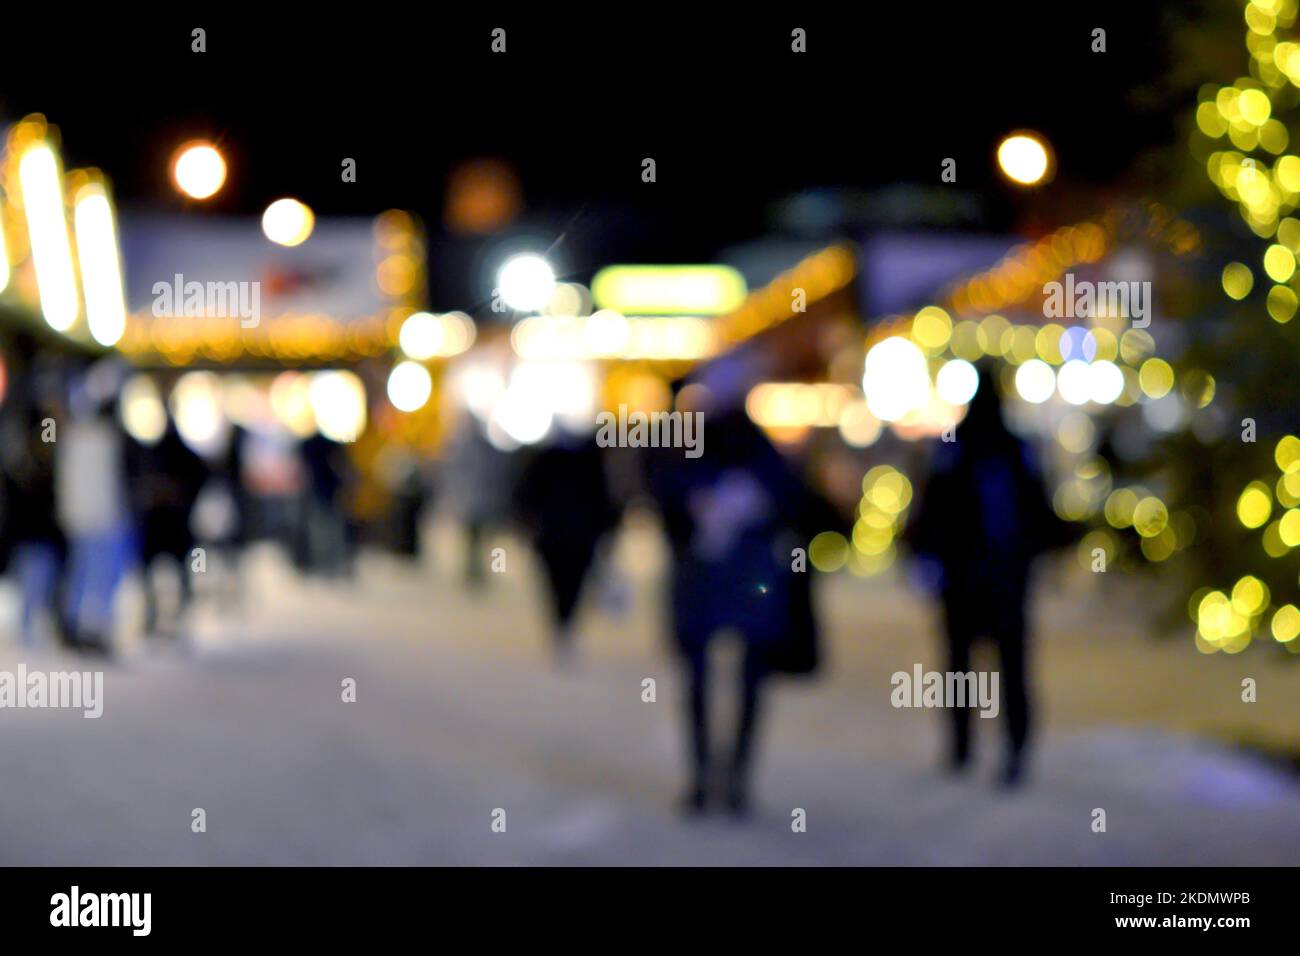 Blurred background. People walk in city square on winter night. Black silhouettes of people walking near houses decorated luminous illumination. White light bokeh blur spots from glowing house lights Stock Photo